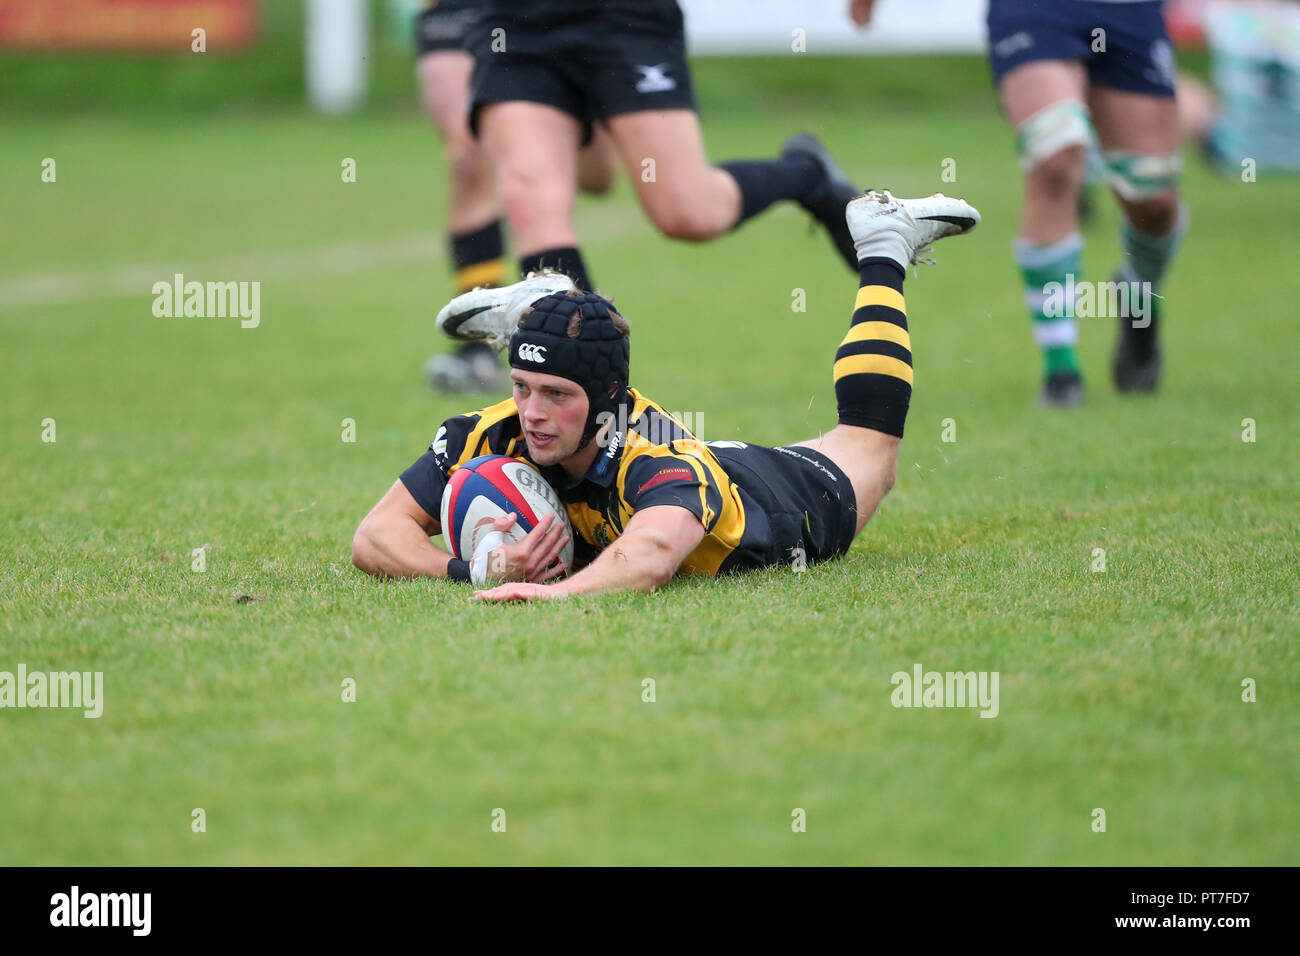 Leicester, England. Rugby Union, Hinckley rfc v South Leicester rfc.   Ben Pointon scores try for Hinckley in the 61st minute of the RFU National League 2 North (NL2N) game played at the Leicester  Road Stadium.  © Phil Hutchinson / Alamy Live News Stock Photo